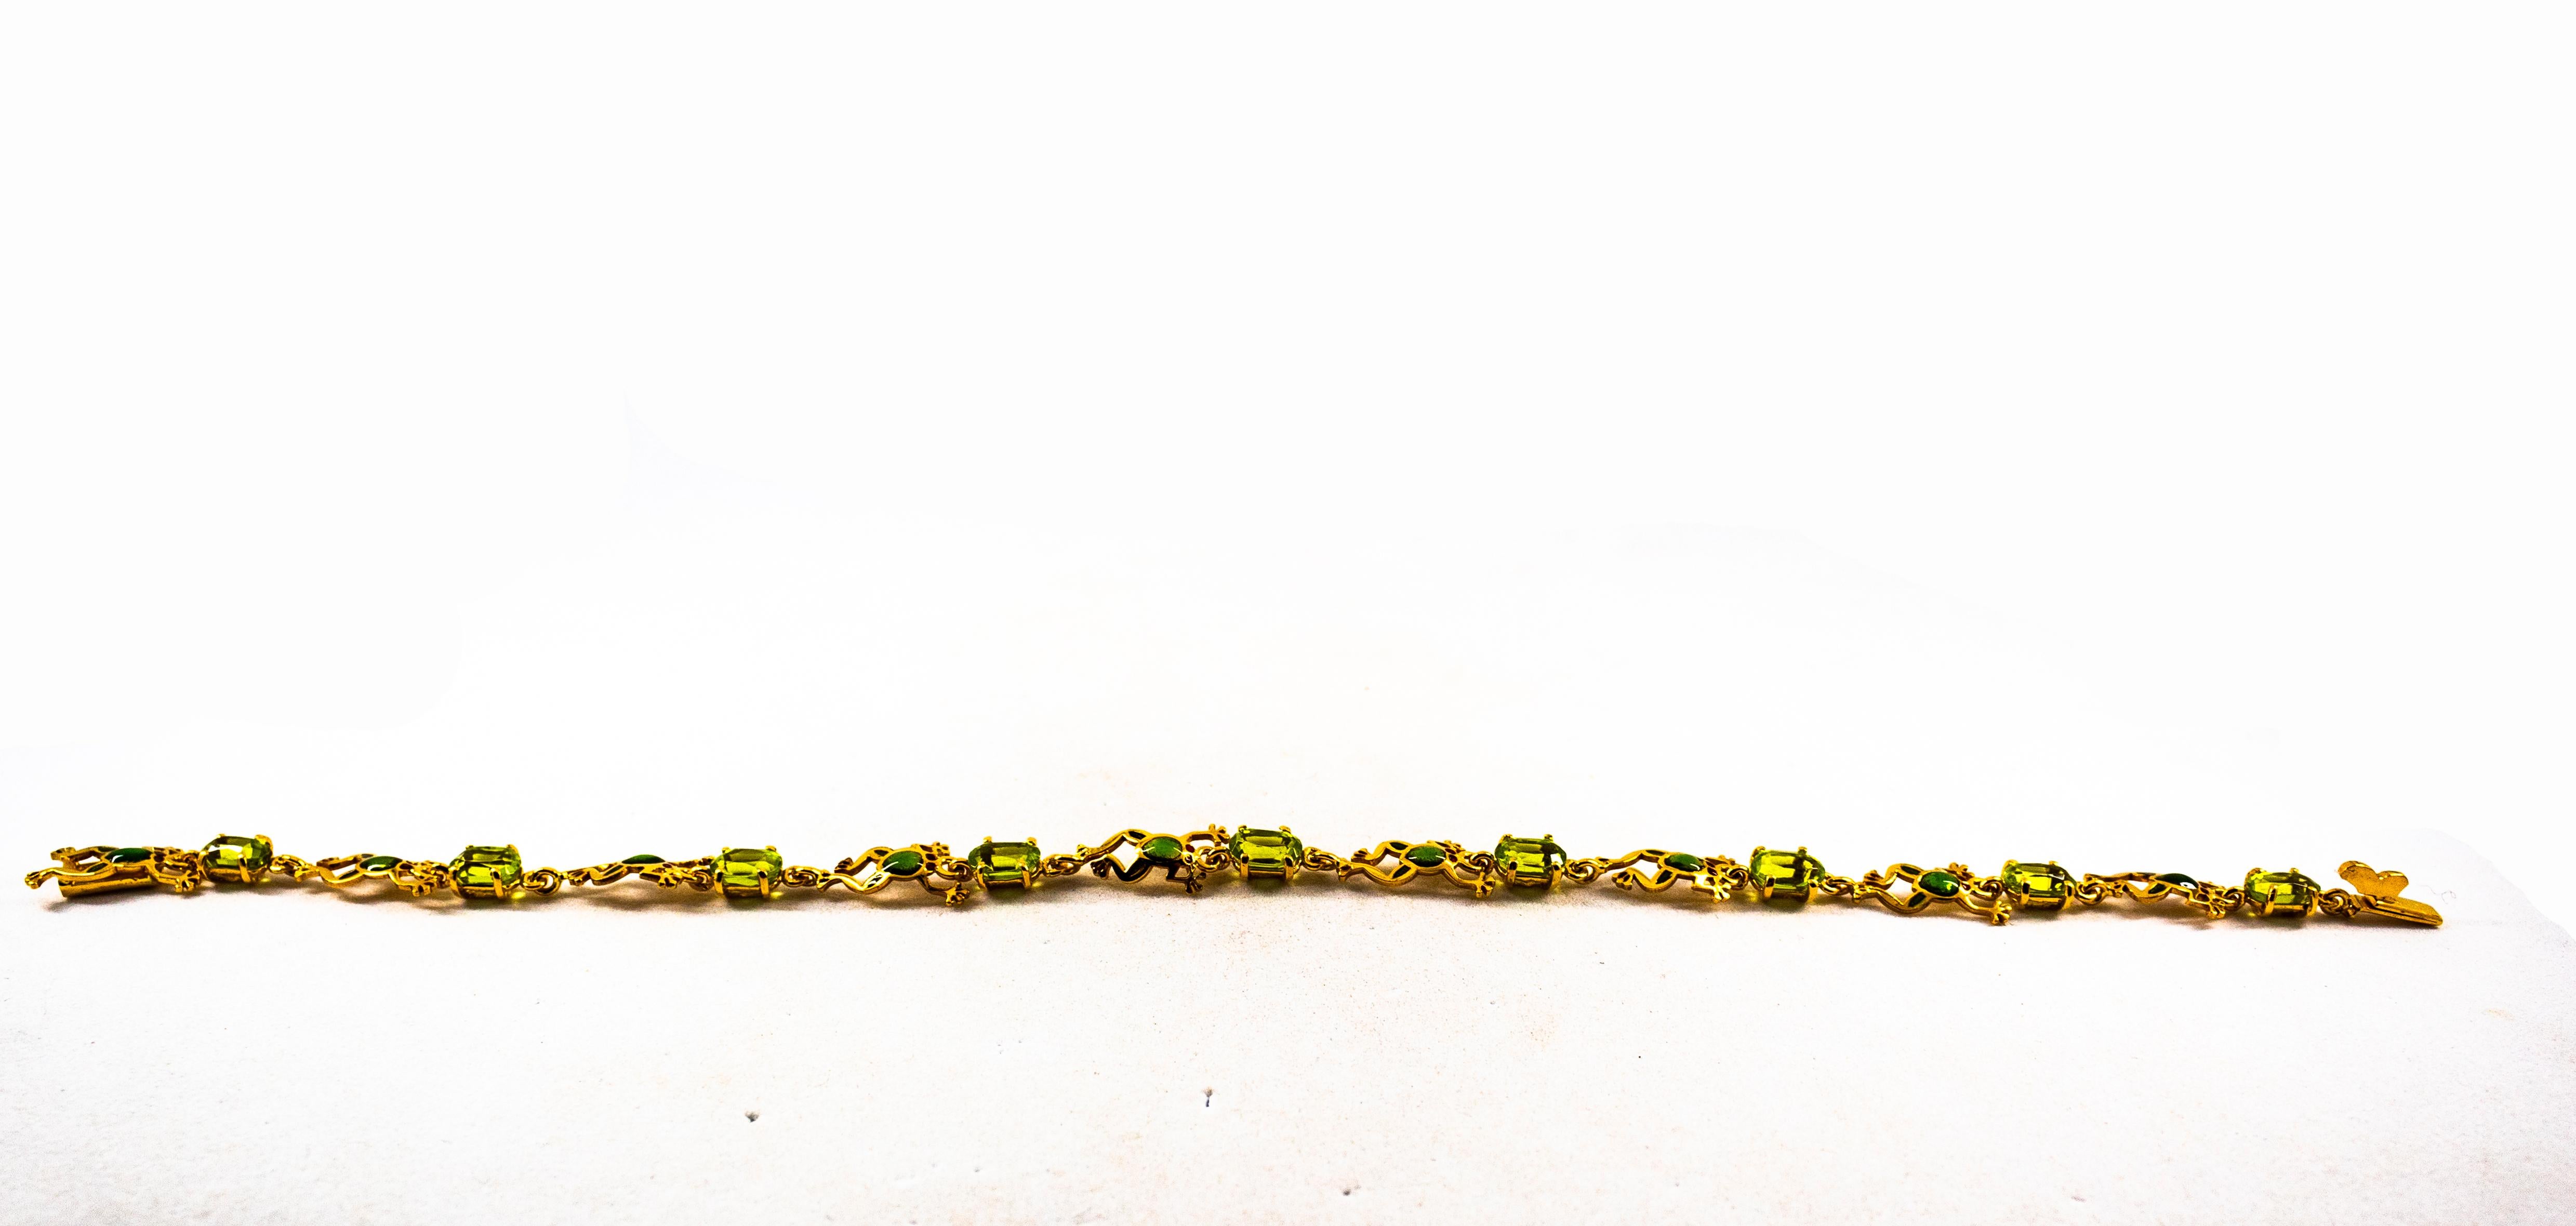 This Bracelet is made of 9K Yellow Gold.
This Bracelet has 5.40 Carats of Oval Cut Peridot.
This Bracelet has Enamel.

This Bracelet has its matching Necklace.
This Bracelet is available also with White Diamonds.
This Bracelet is available also with